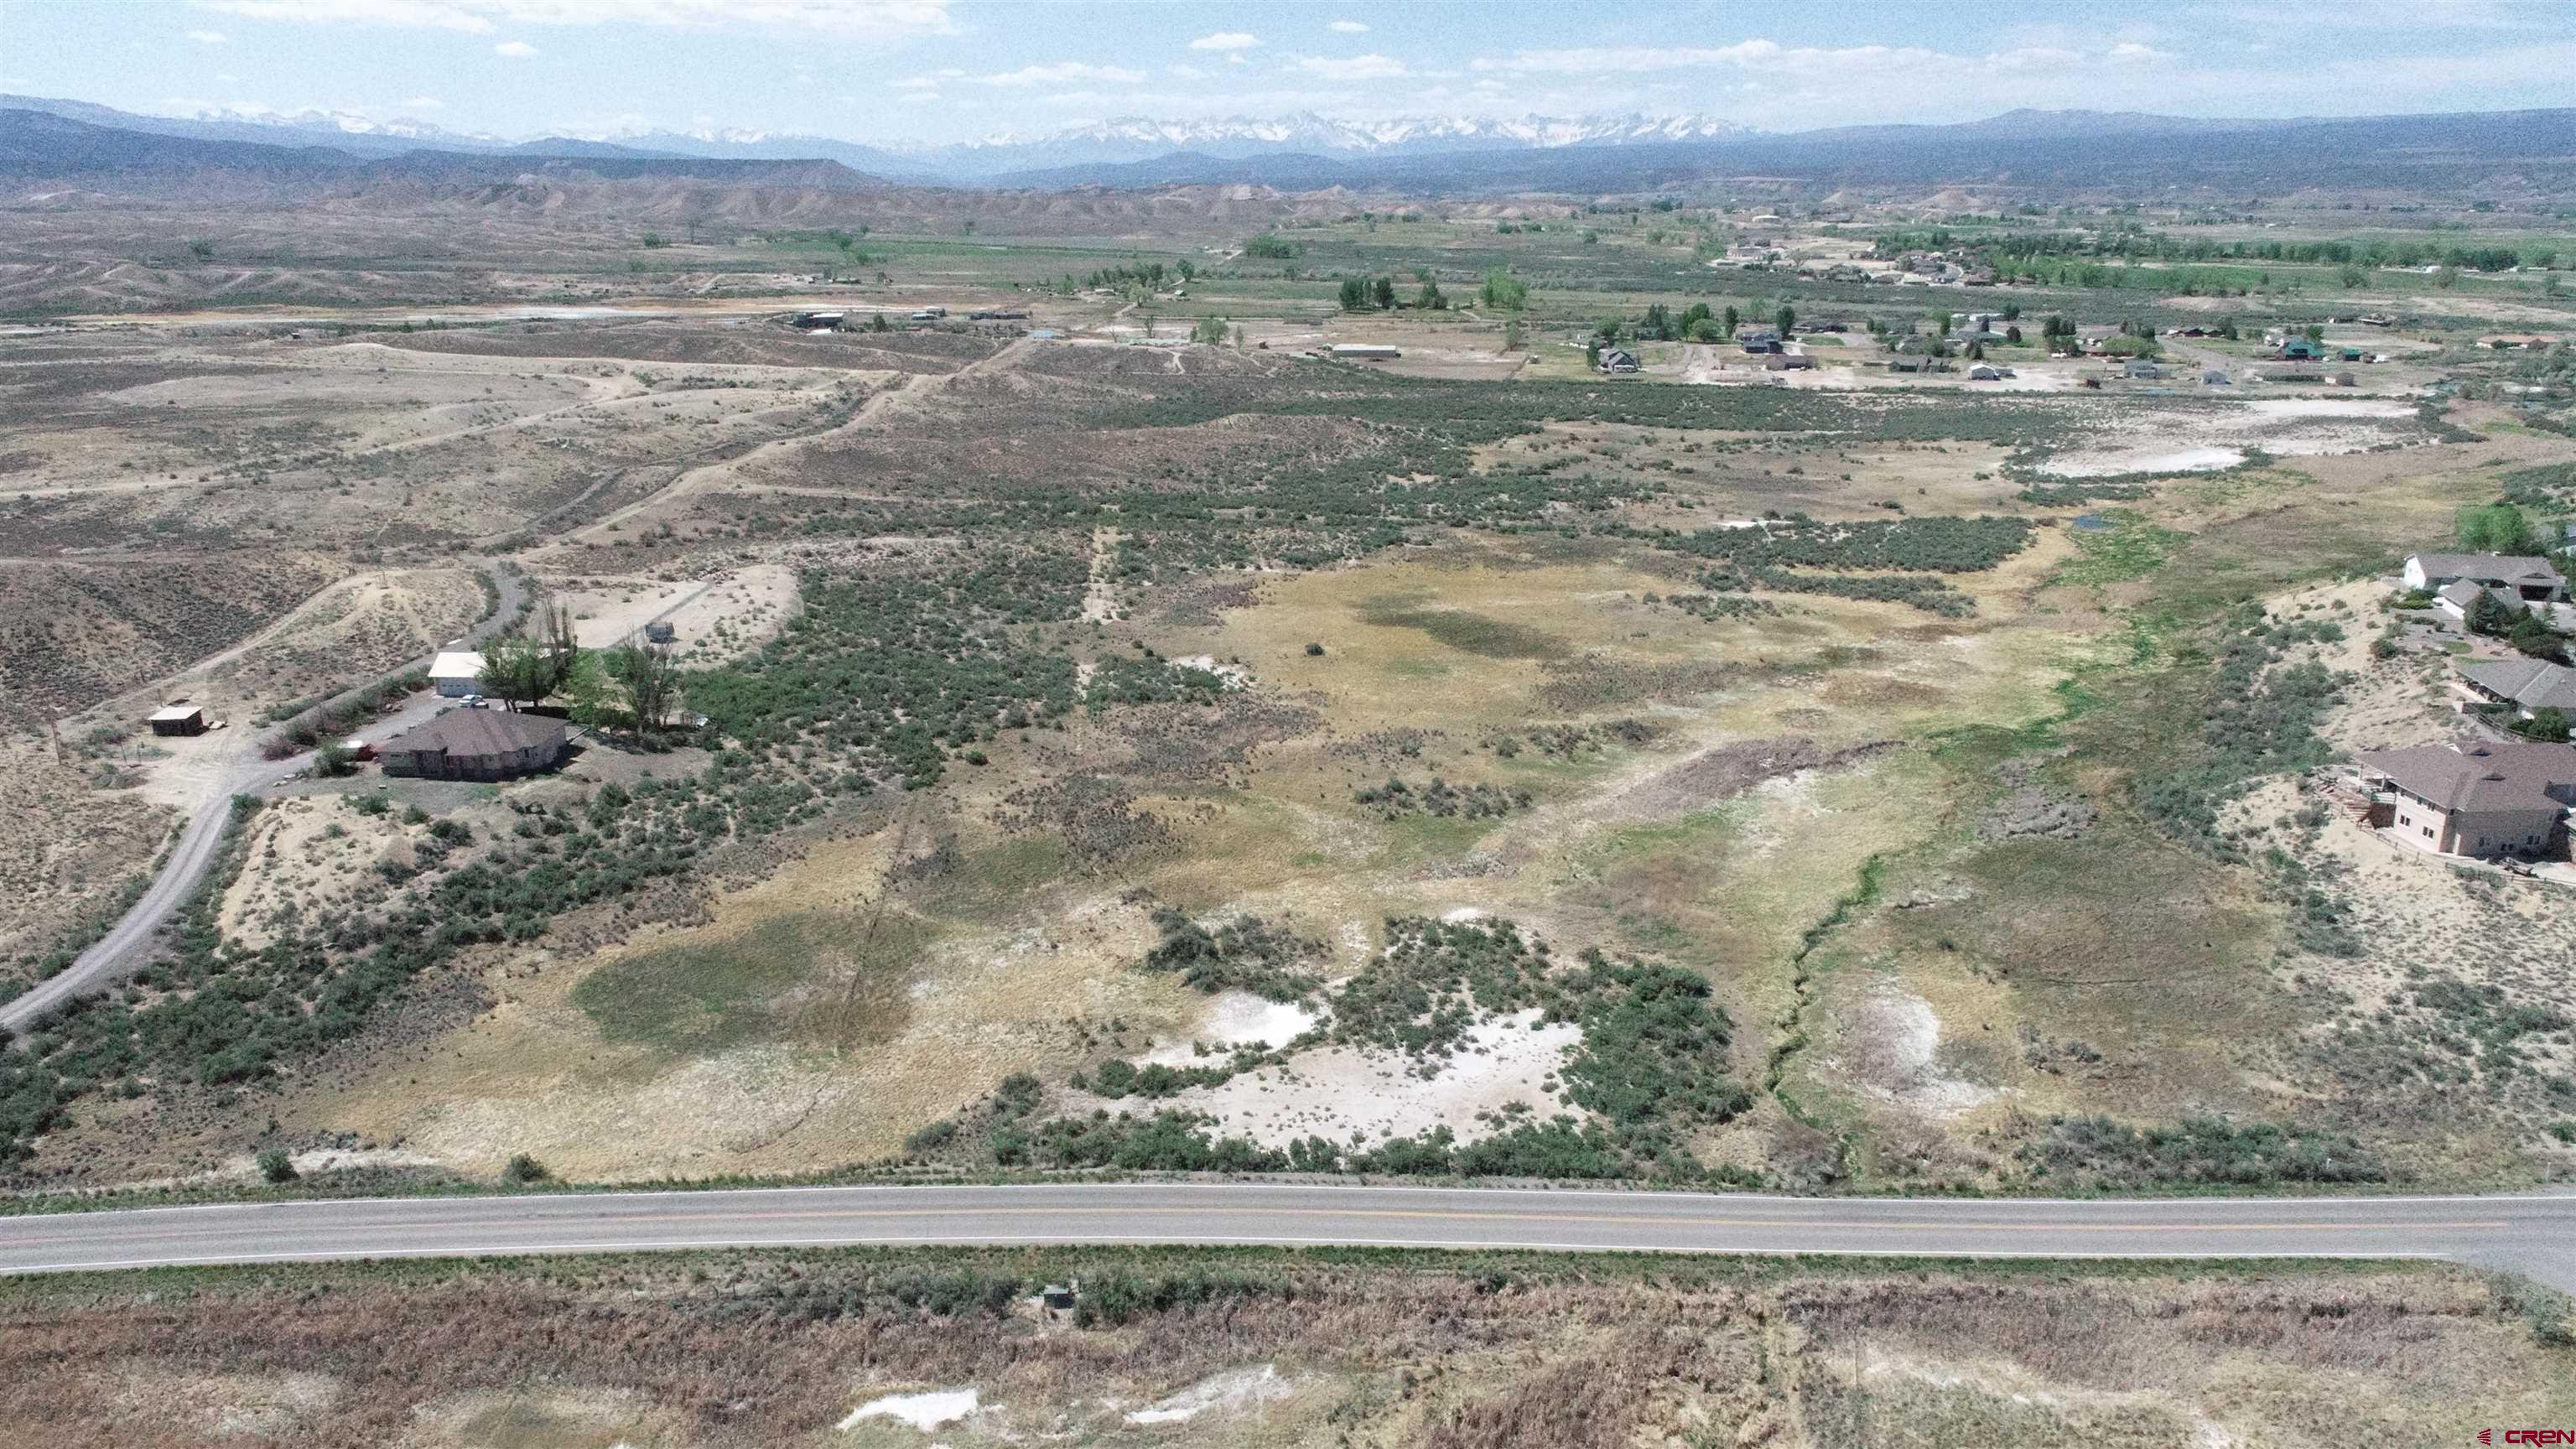 Calling all developers! This 37.21 acre parcel is near multiple neighborhoods and only a few minutes from highway 550 in Montrose. This land is ready to be annexed and zoned accordingly to whatever a developer may need. The property also comes with water rights. Survey coming soon!